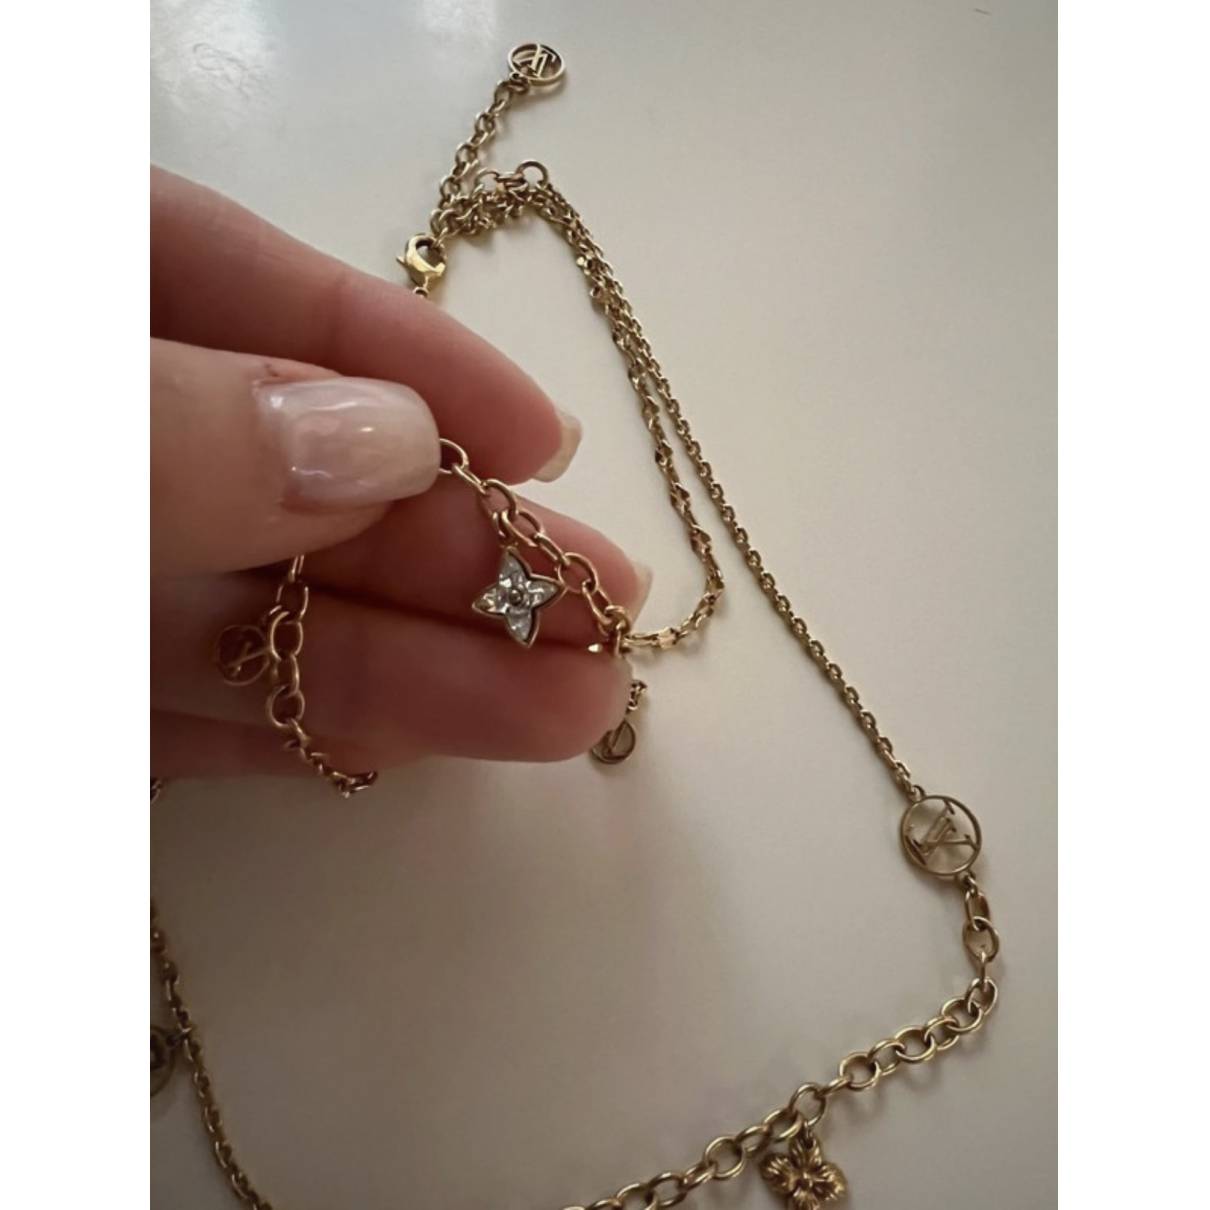 Louis Vuitton Blooming Strass Necklace - Gold-Tone Metal Station, Necklaces  - LOU786474